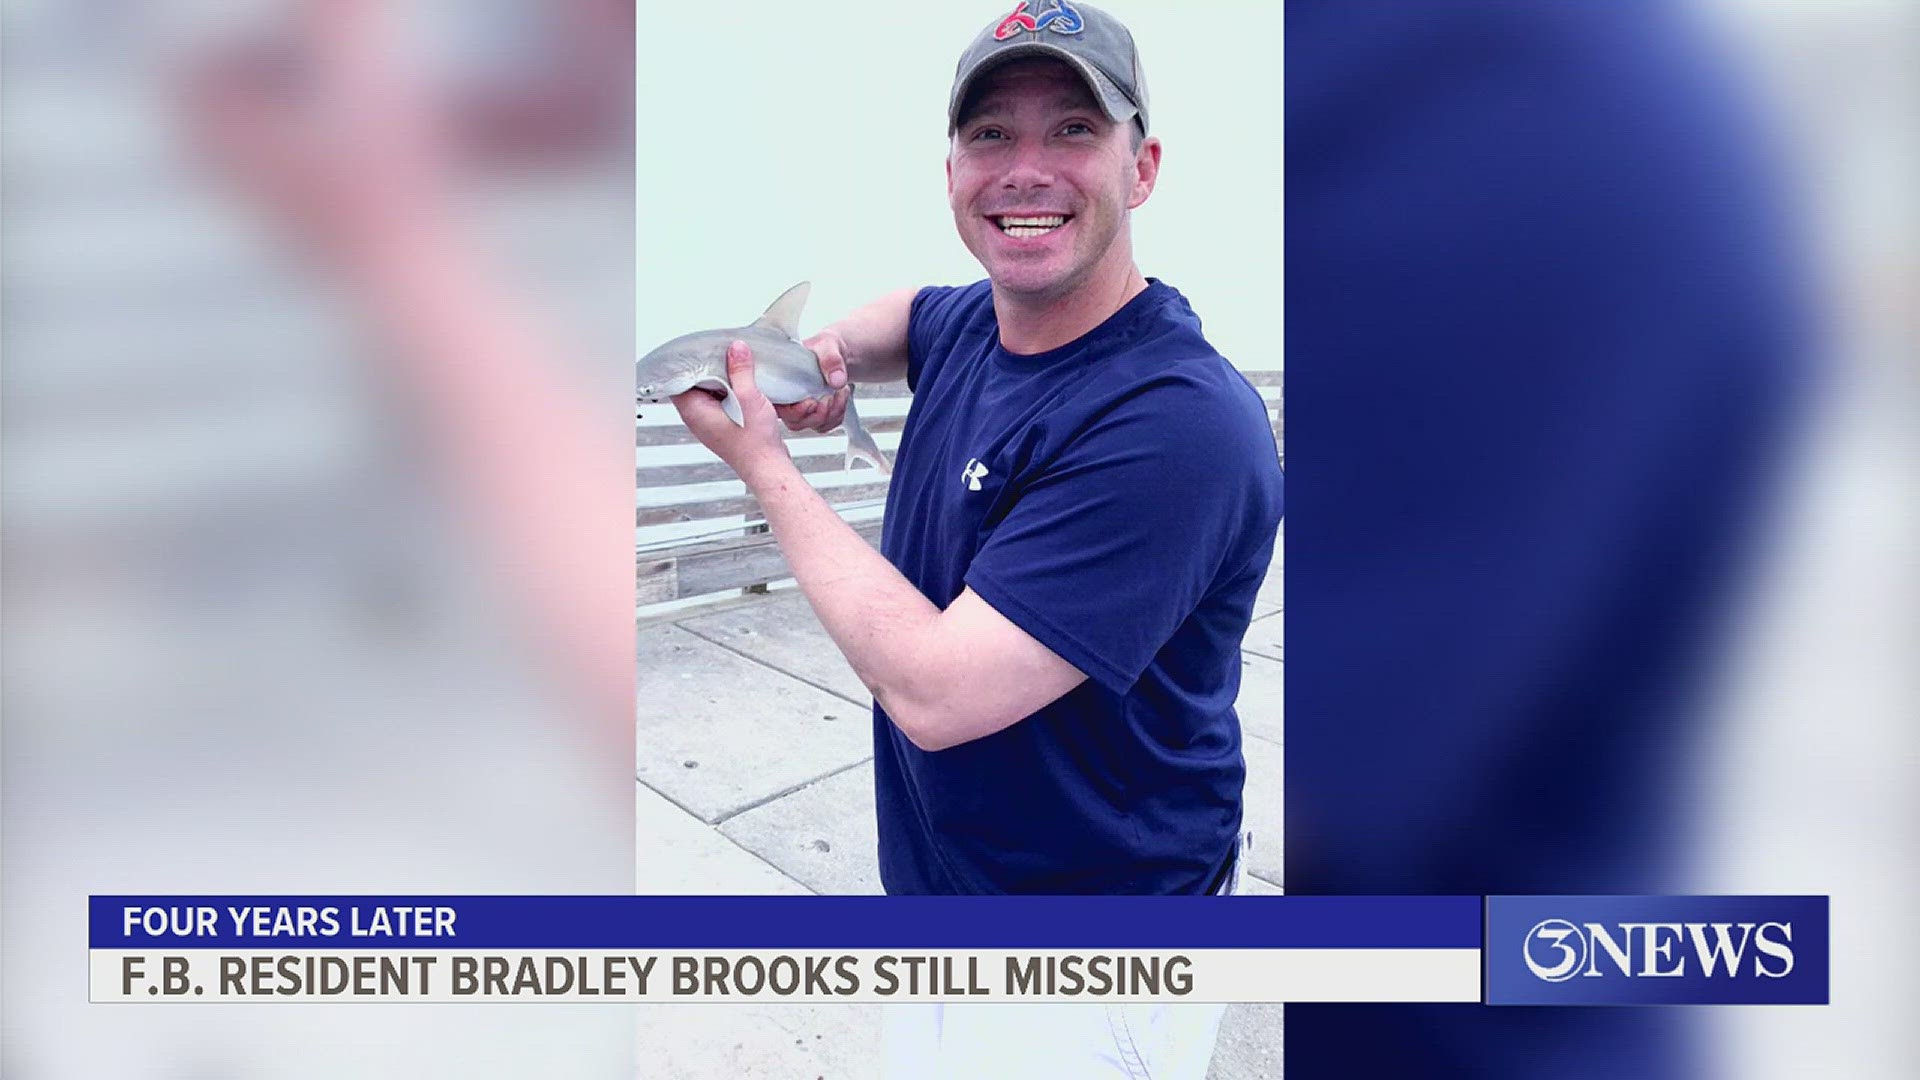 A native of Flour Bluff, Bradley Brooks is still missing after four years.